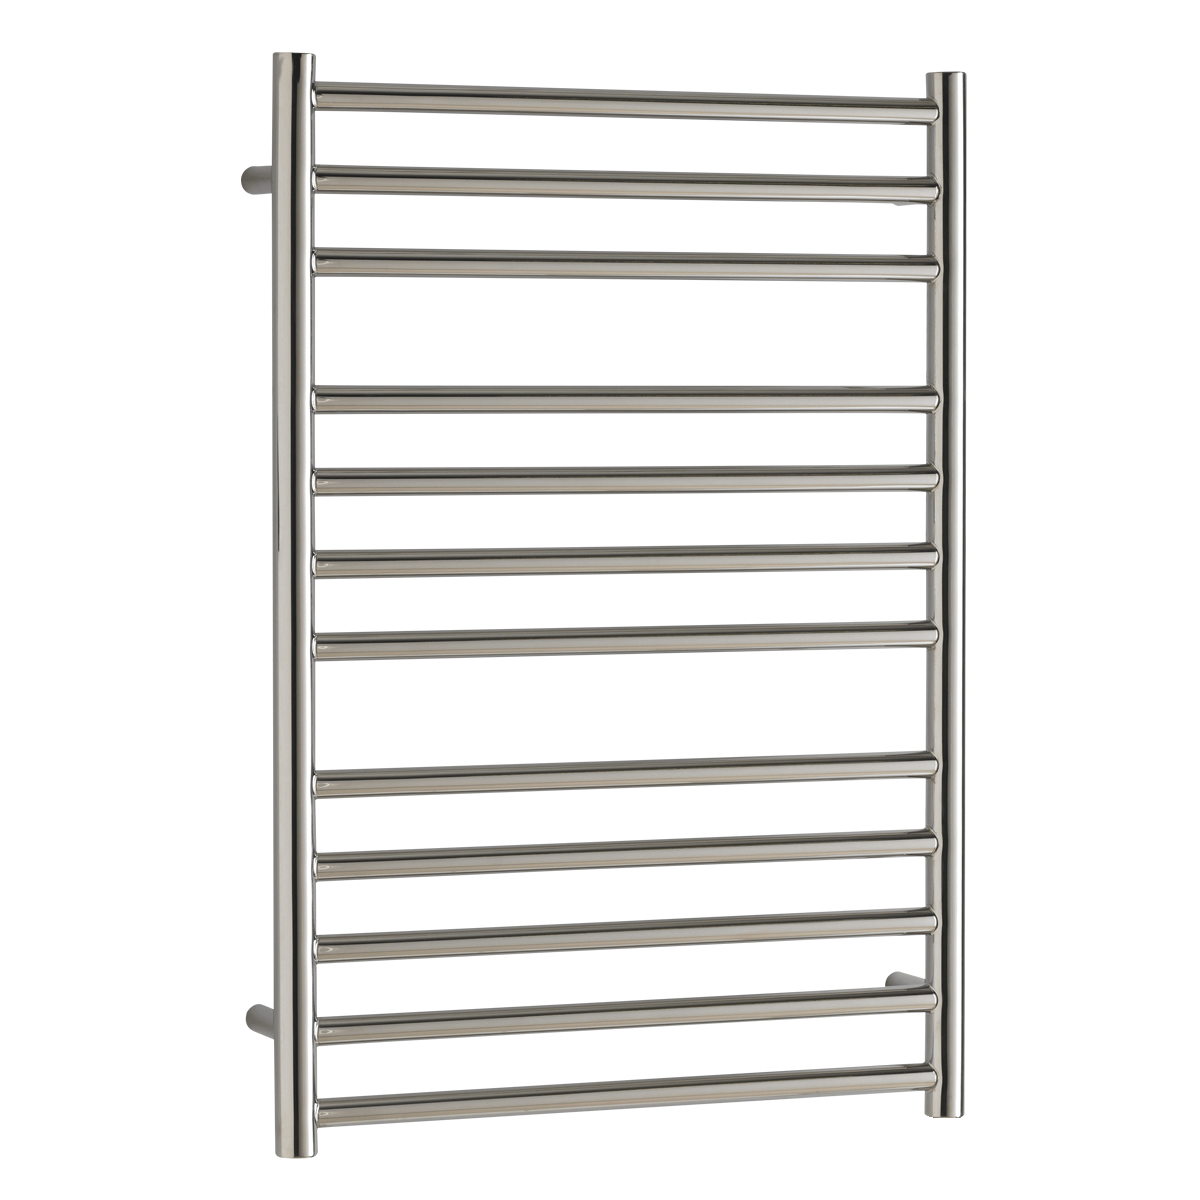 Aura Steel Stainless Steel Dual Fuel Towel Rail with Thermostat, Timer + WiFi Control Efficient Heating, Well Made, Excellent Value Buy Online From Solaire Quartz UK Shop 11